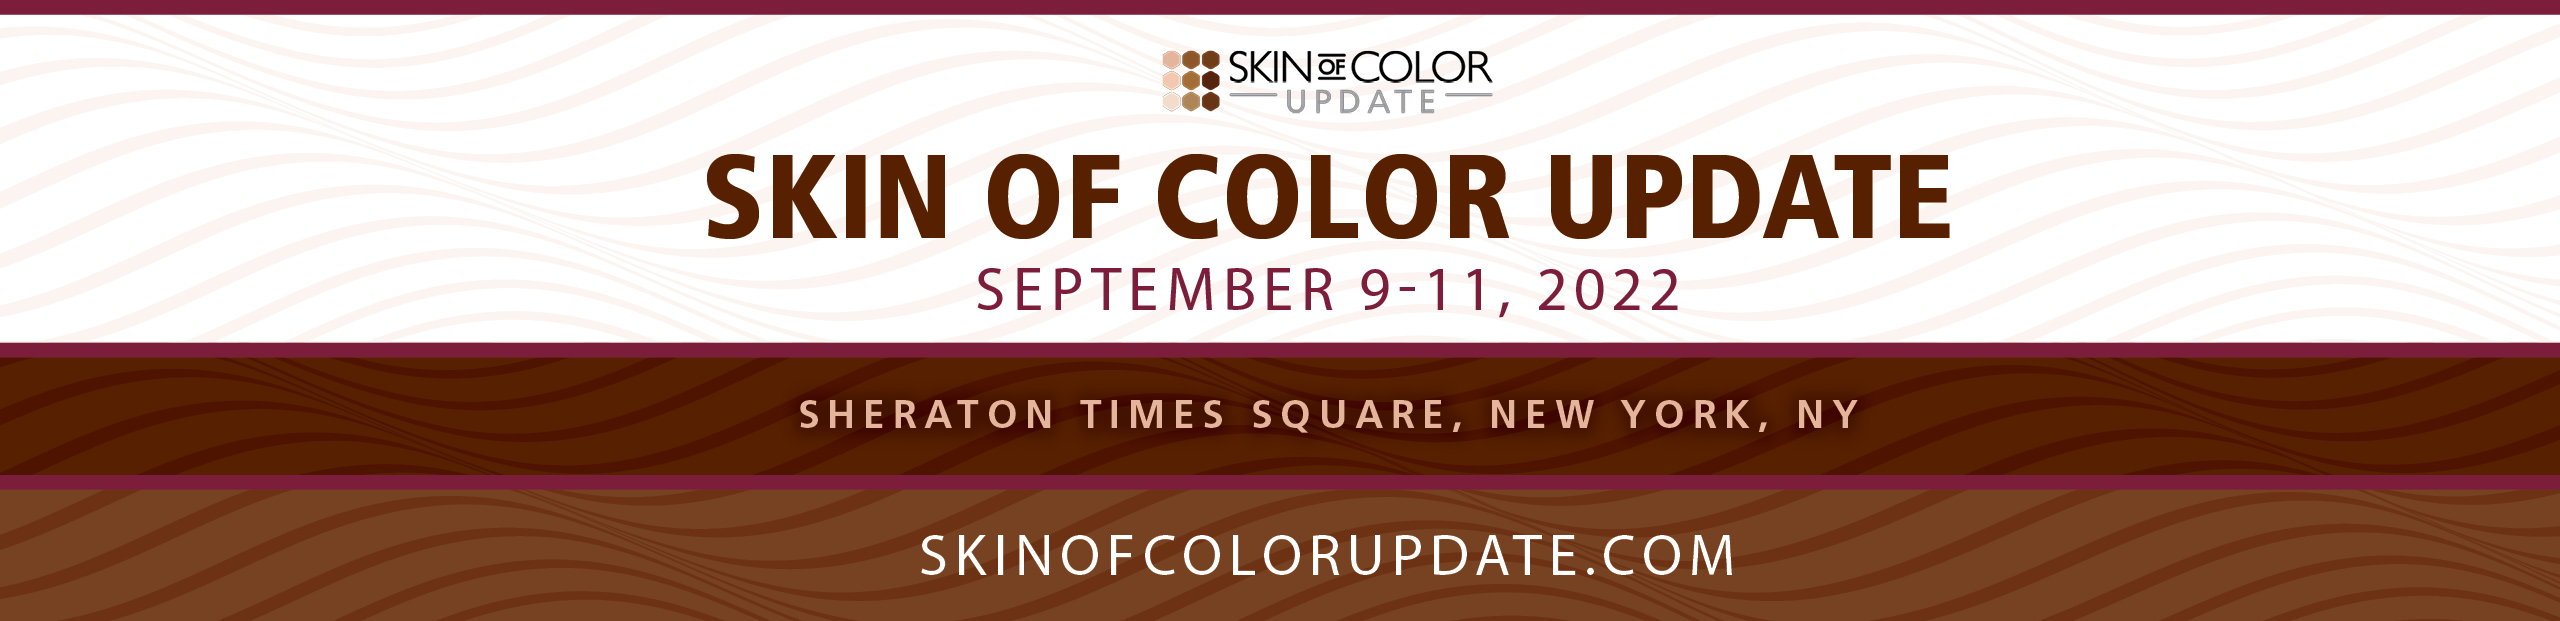 Skin of Color Update Dermatology Conference New York City